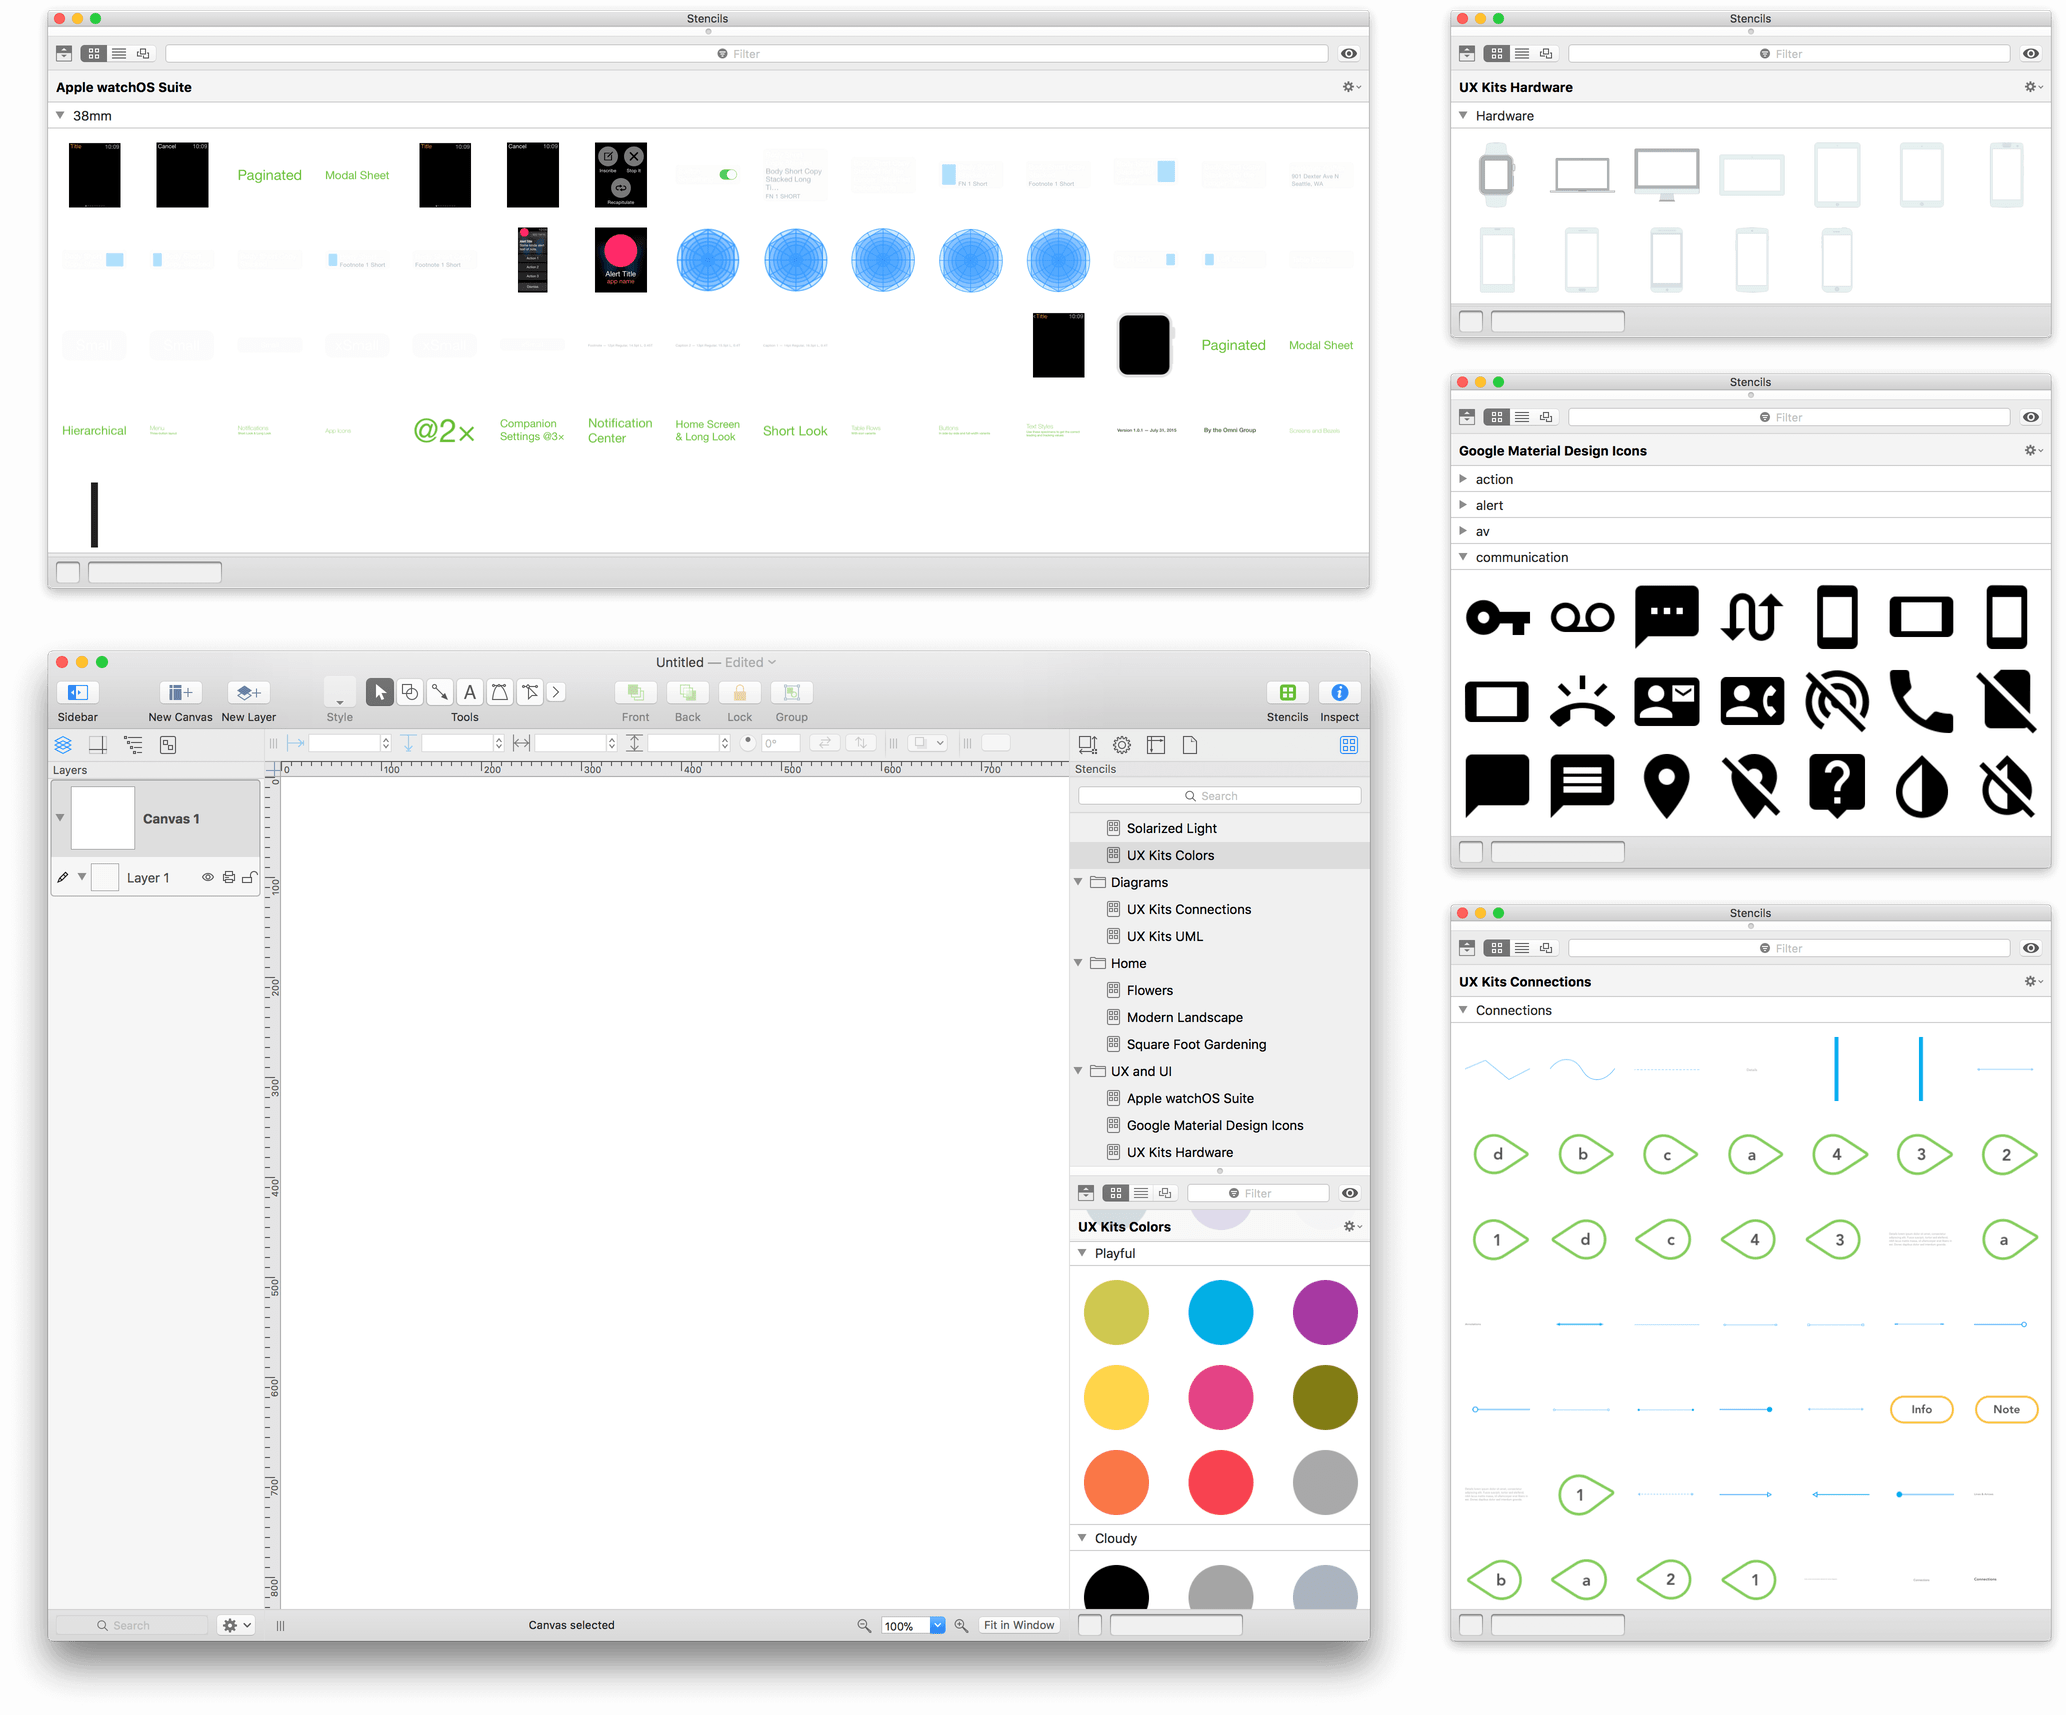 At lower-left is an OmniGraffle window, with additional Stencil Browser windows shown above and to the right.